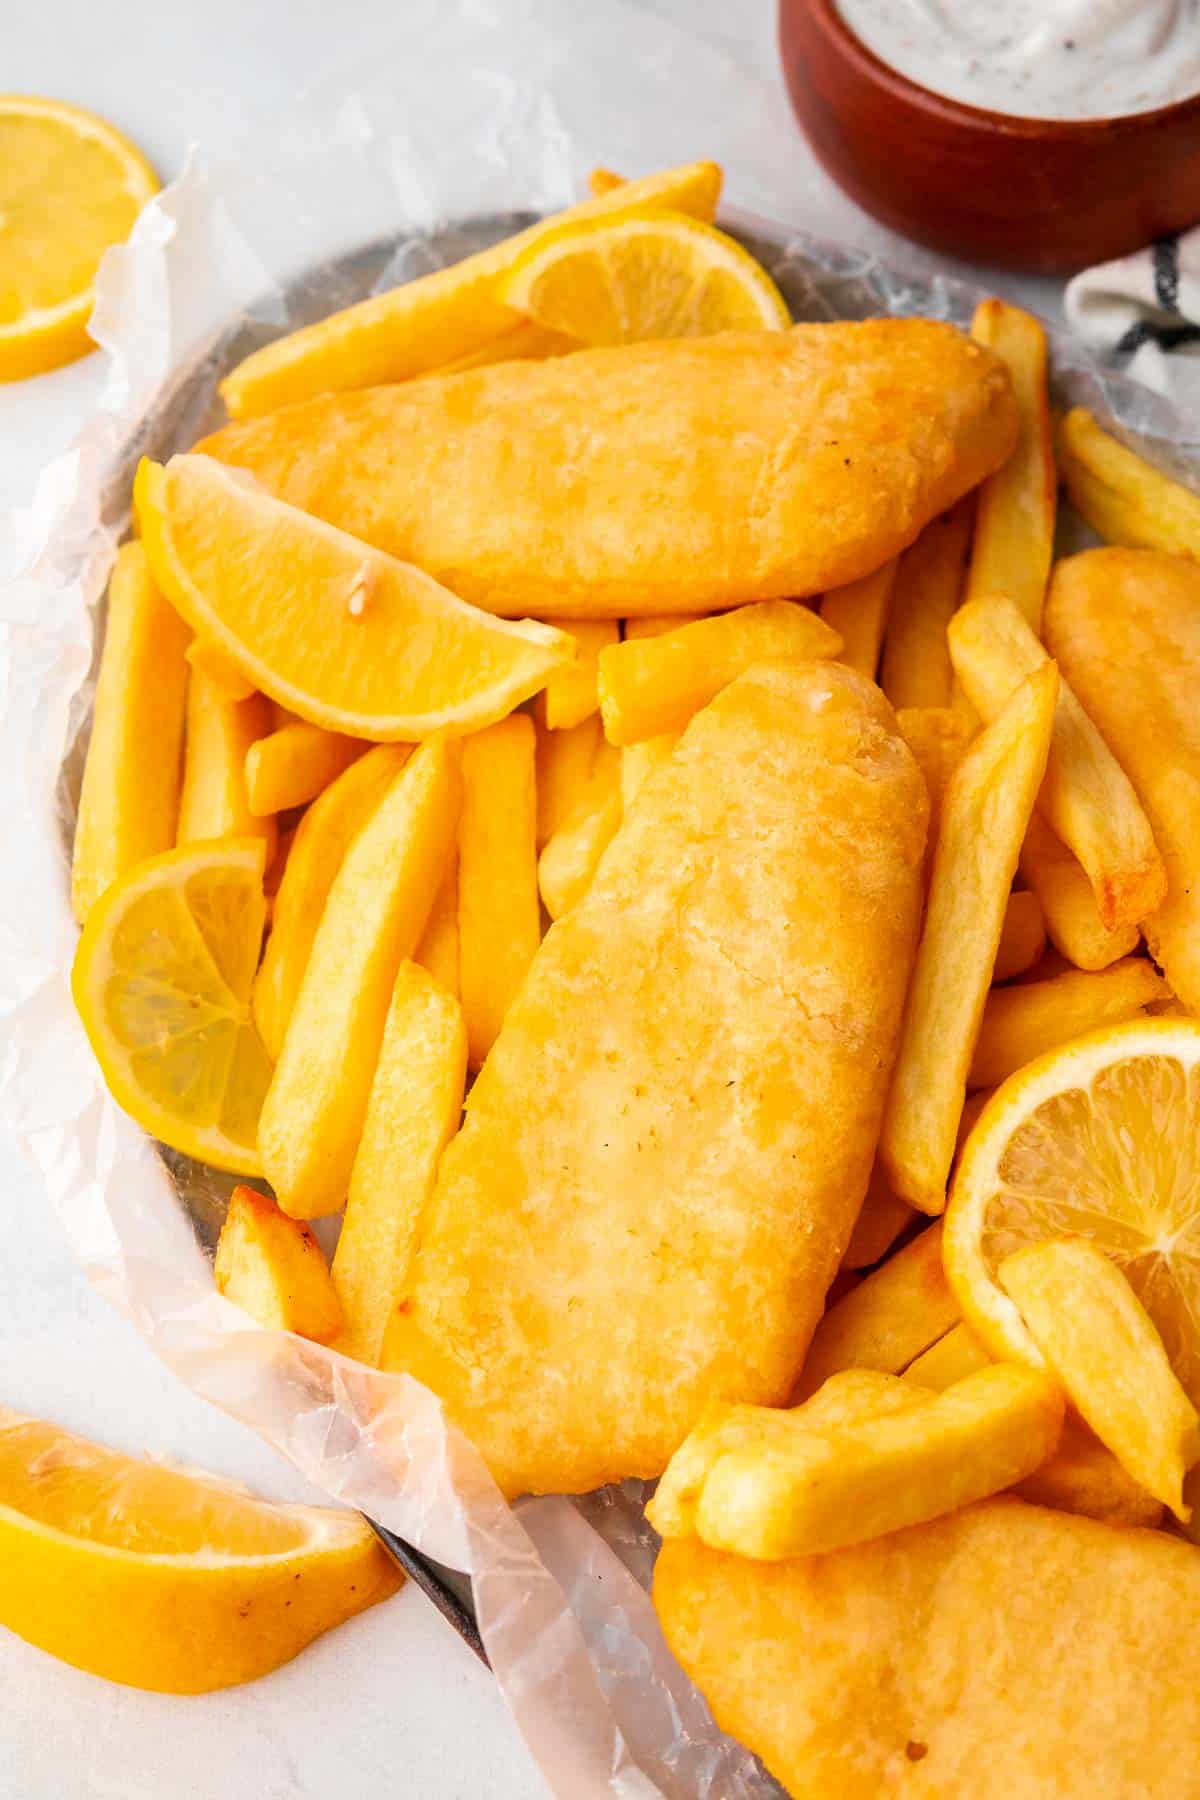 golden and crispy fish fillets on a plate of fries served with lemon wedges